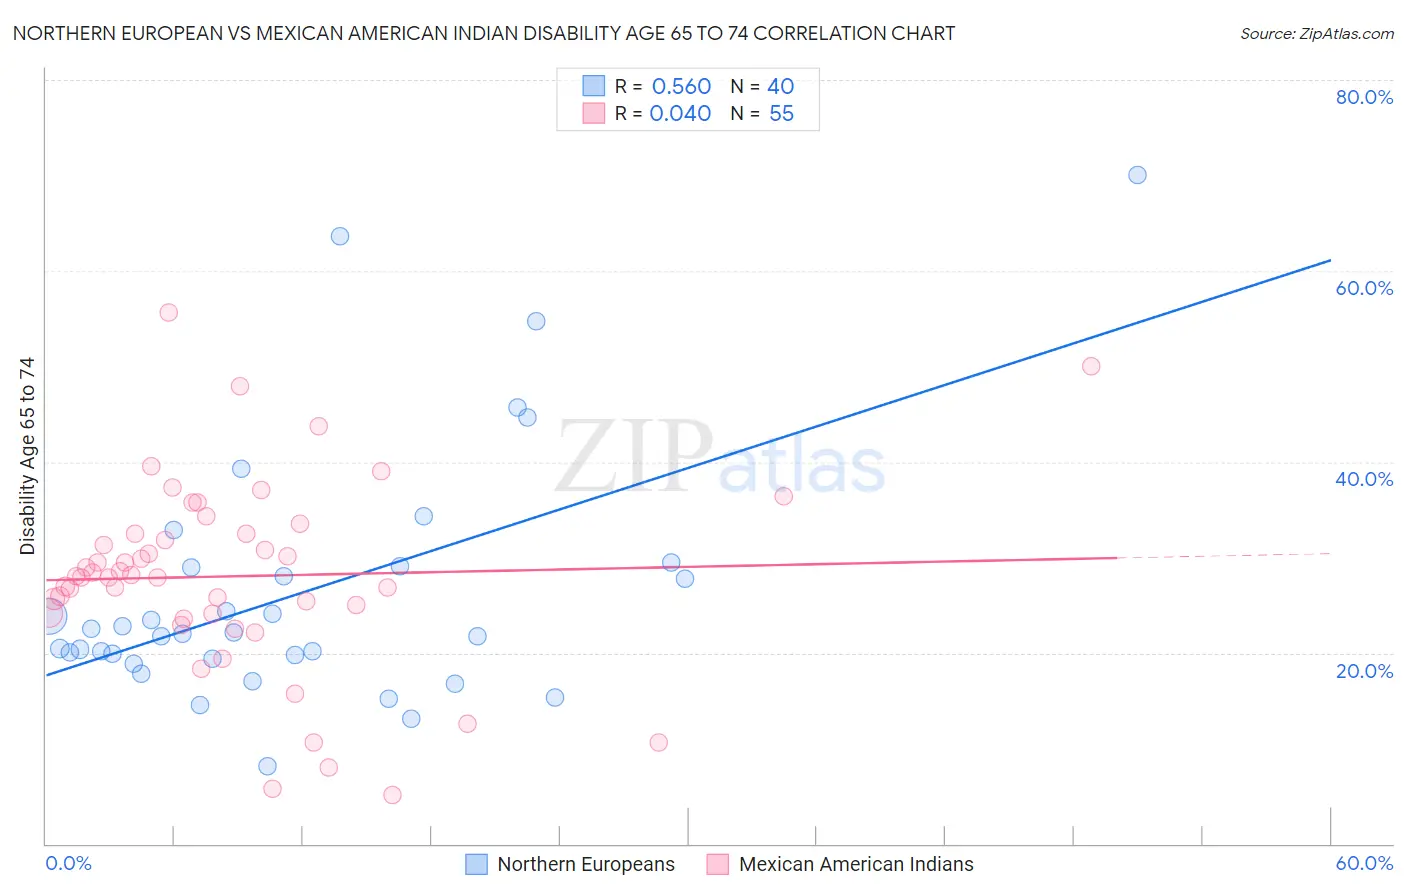 Northern European vs Mexican American Indian Disability Age 65 to 74